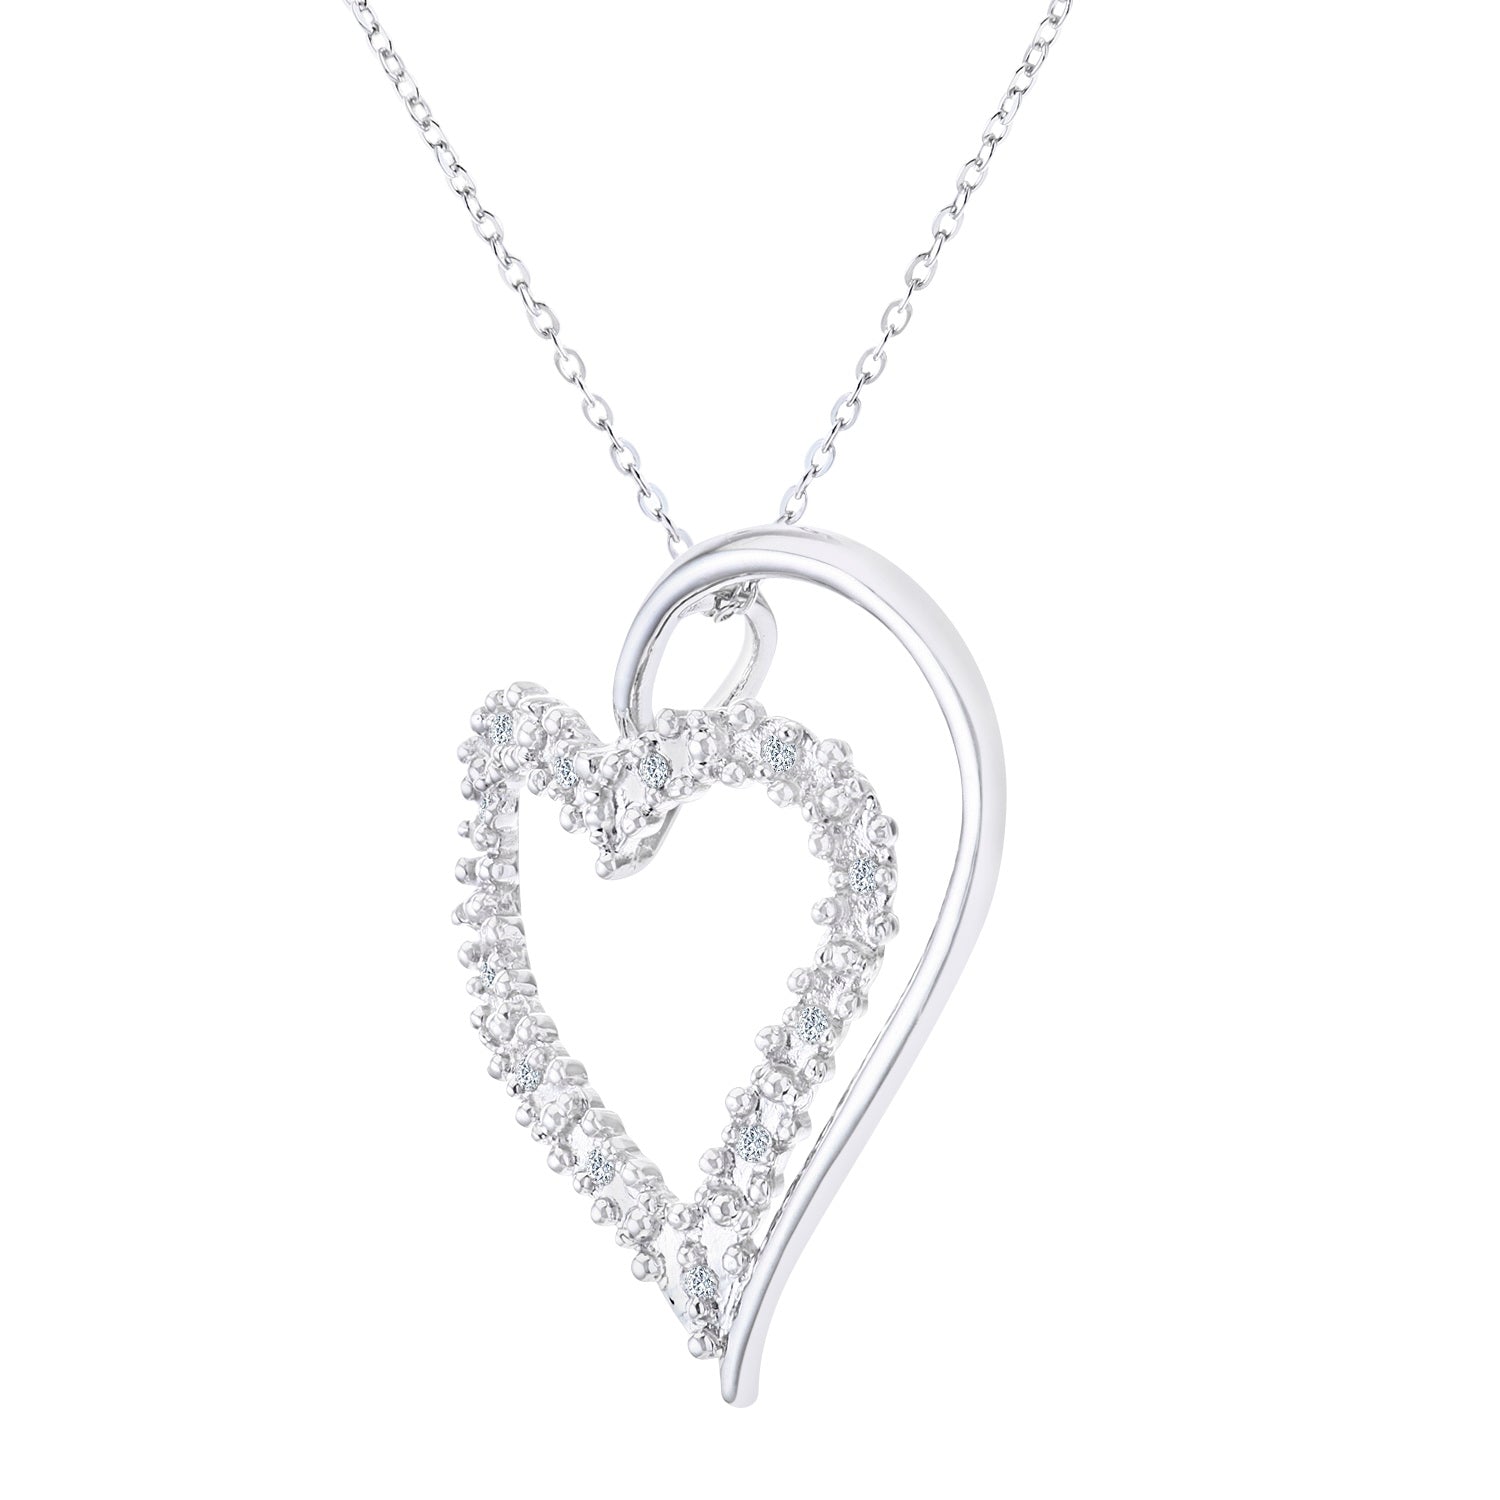 9ct White Gold  Round 5pts Diamond Heart Pendant Necklace 18 inch - PP0AXL3175W